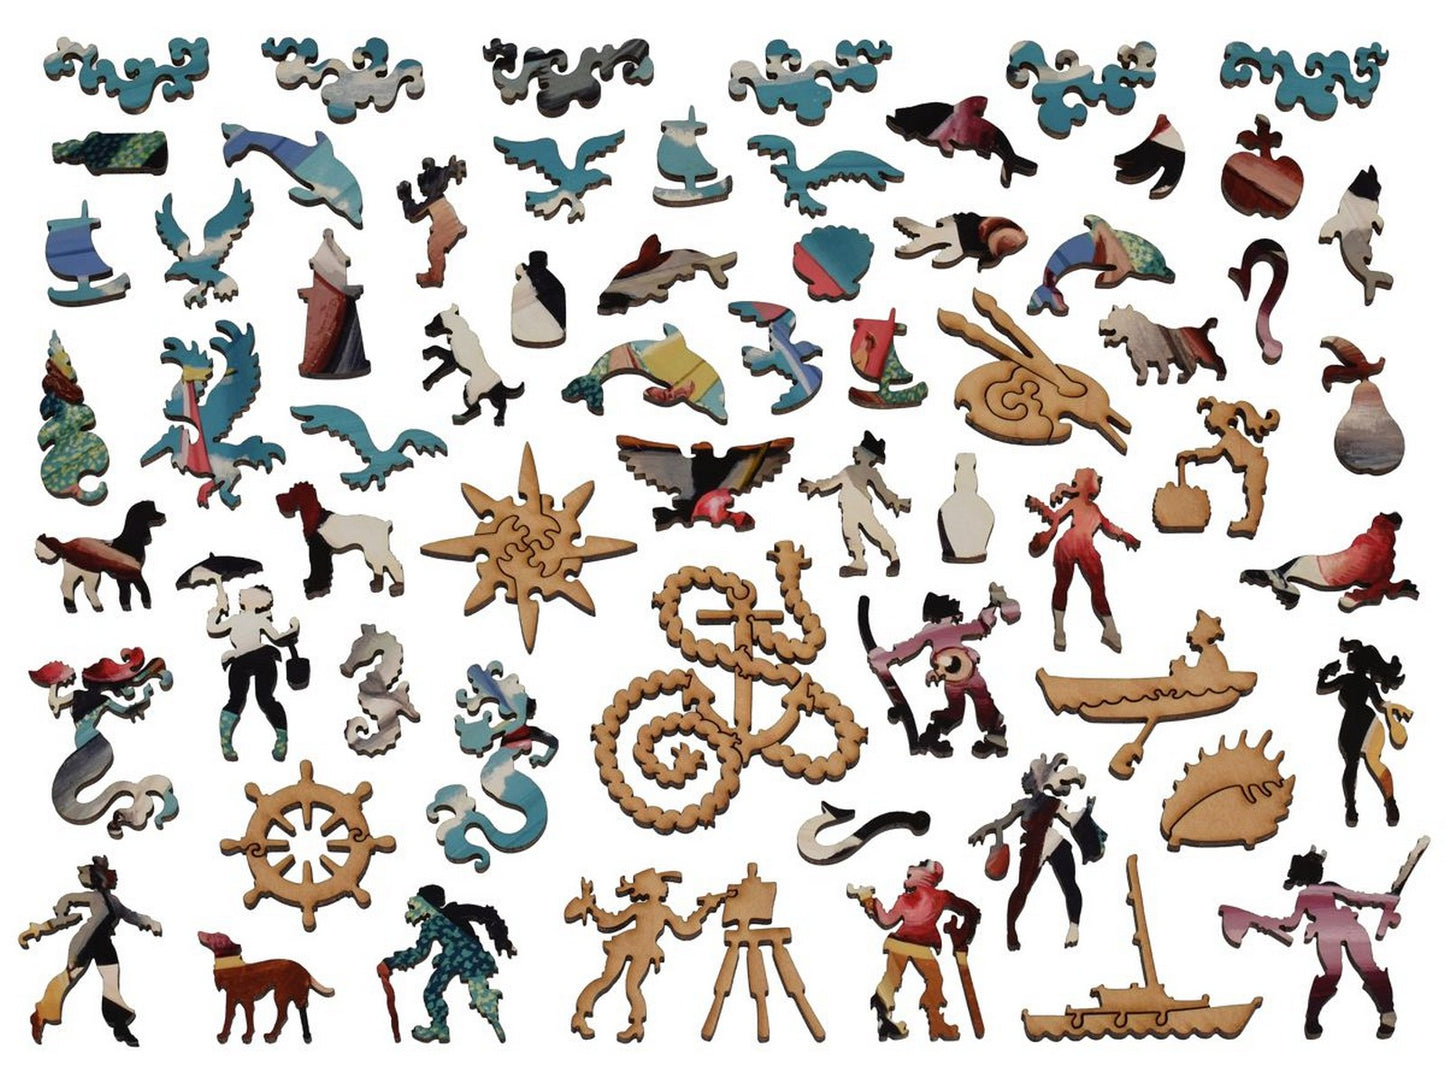 The whimsies that can be found in the puzzle, Sea Dog.